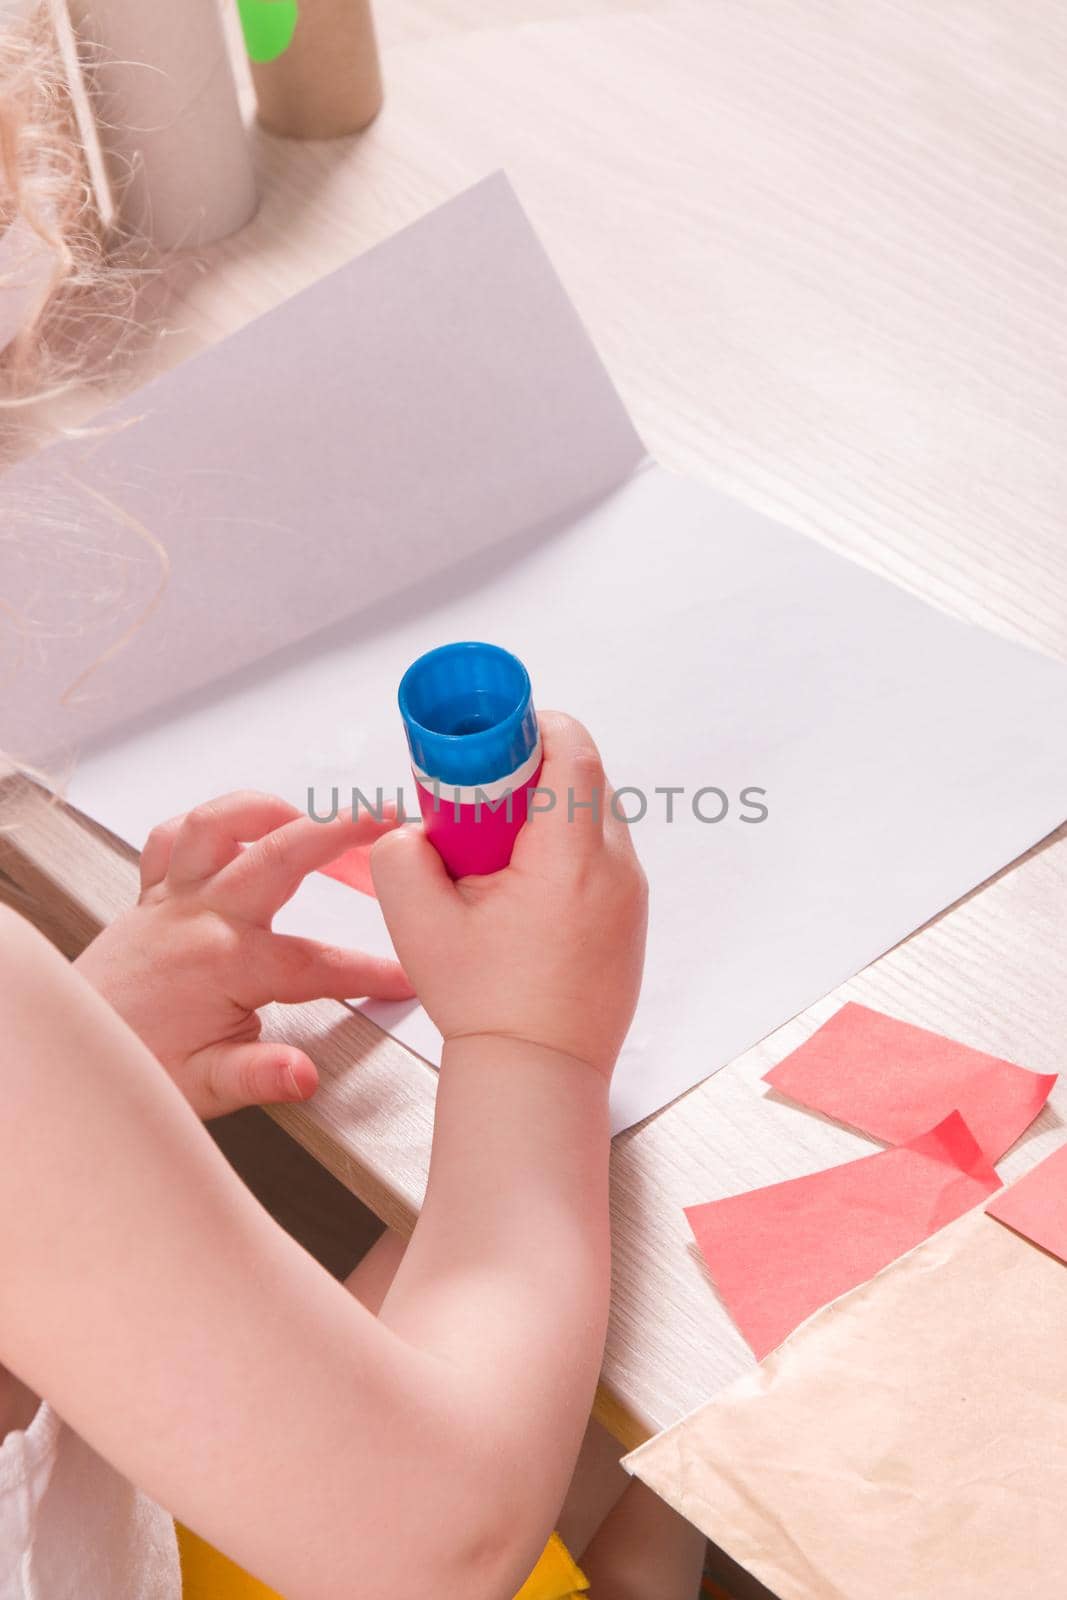 the child makes an applique, crafts from colored paper and toilet paper stools, what to do with the child at home, development of imagination and fine motor skills of hands